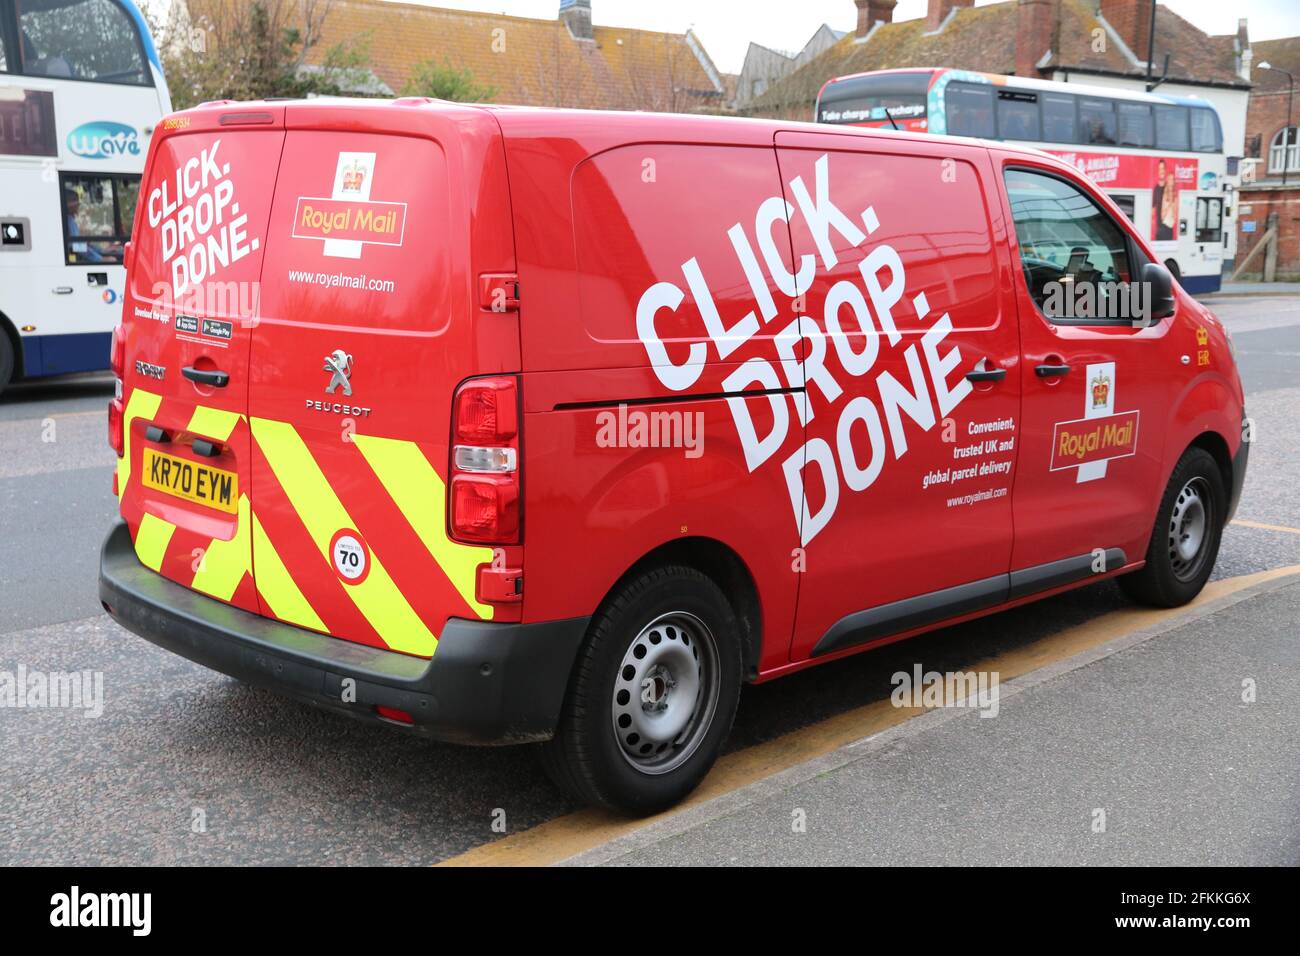 BRAND NEW 2021 ROYAL MAIL PEUGEOT DELIVERY VAN WITH CLICK DROP DONE PARCEL  LETTERING Stock Photo - Alamy